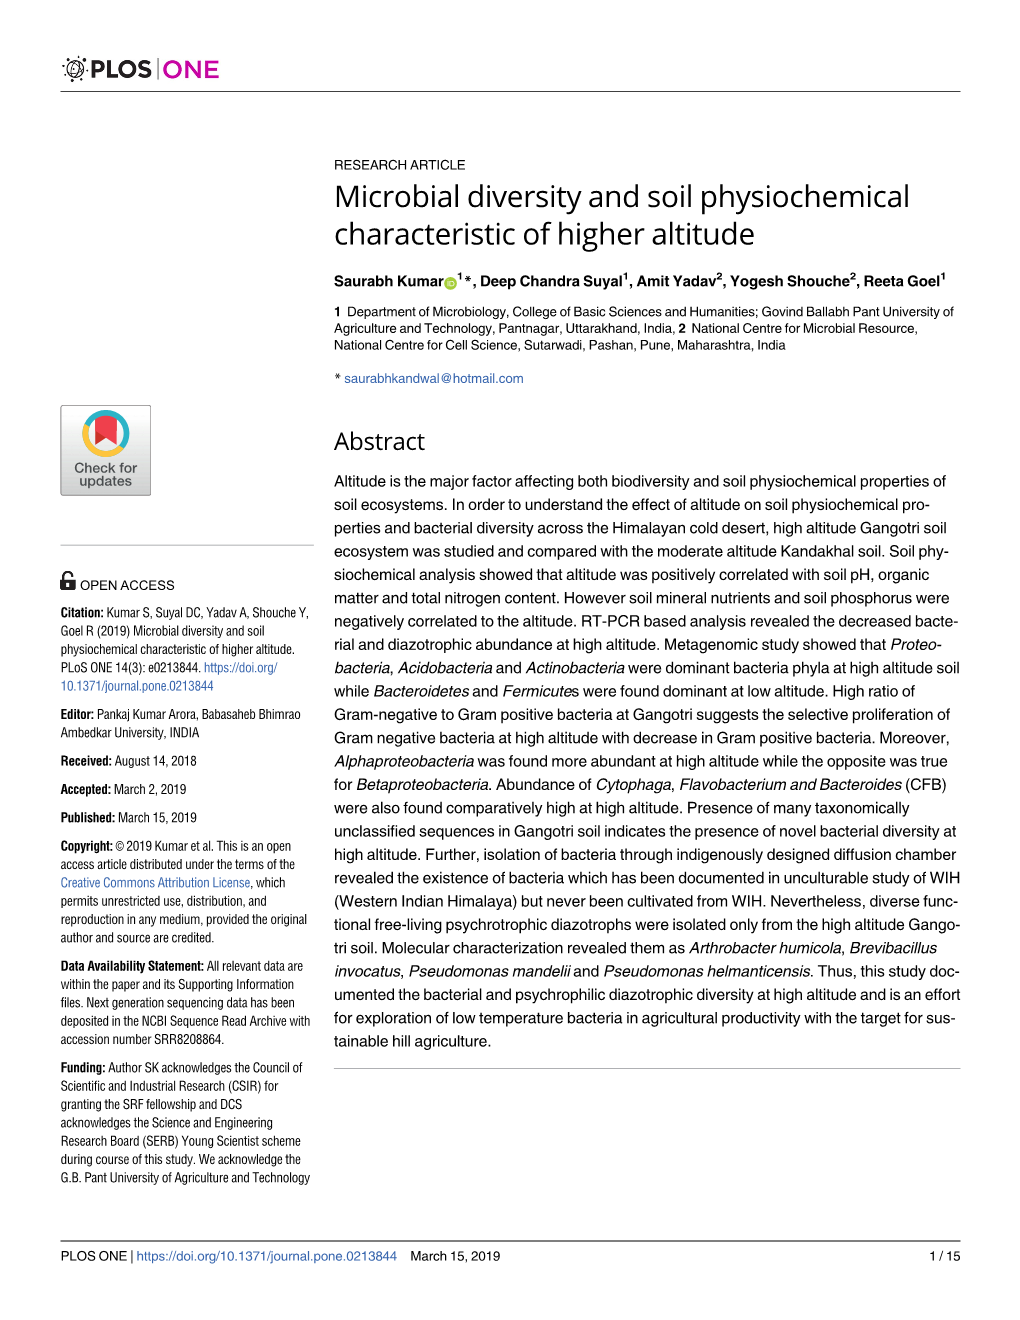 Microbial Diversity and Soil Physiochemical Characteristic of Higher Altitude